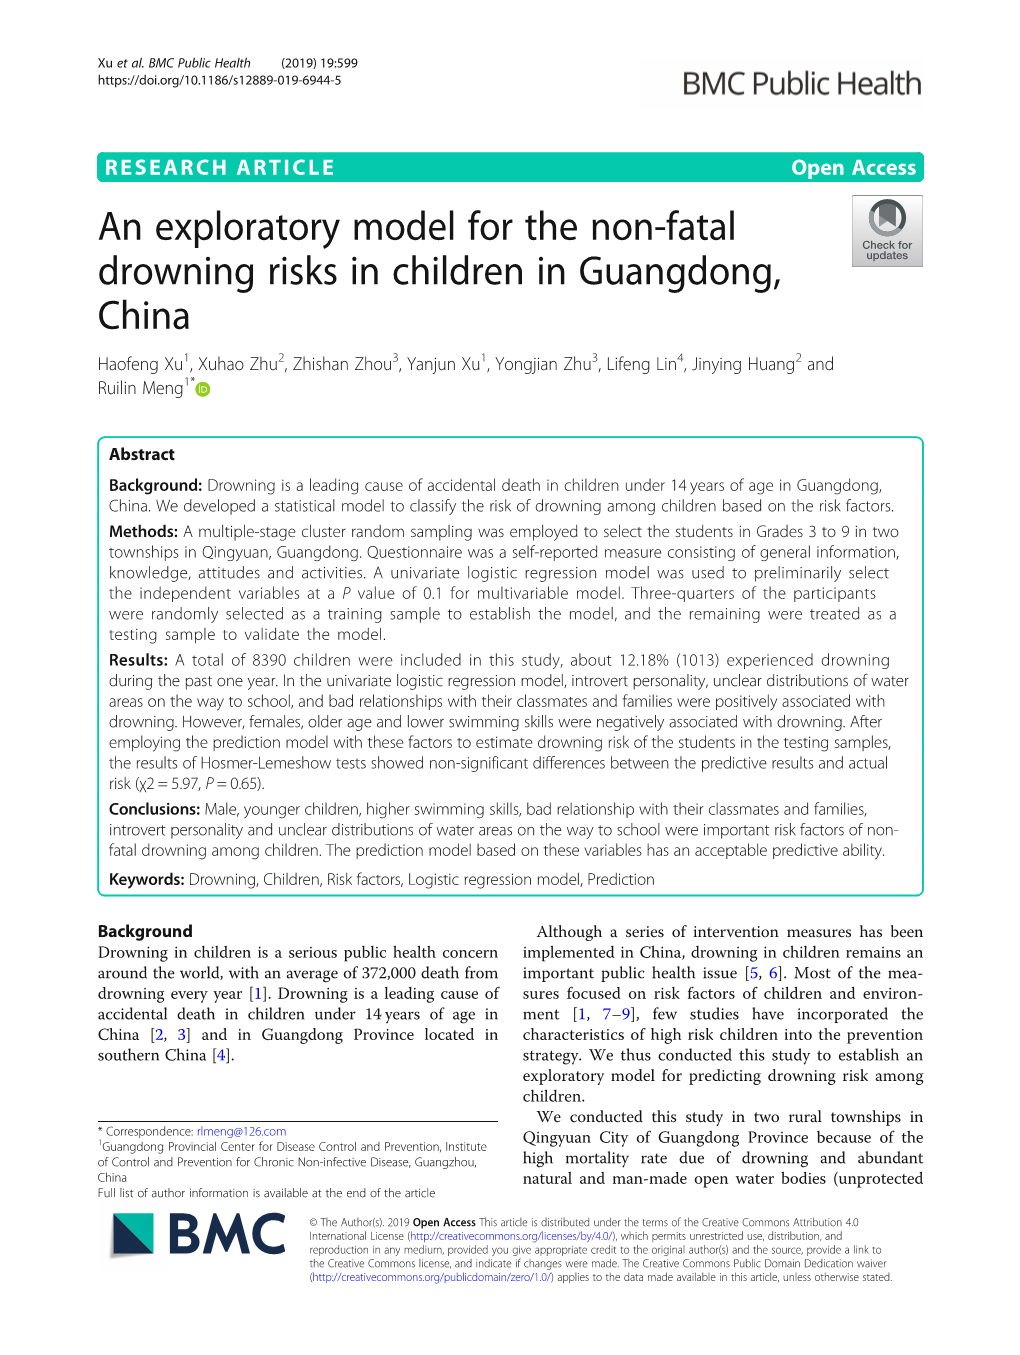 An Exploratory Model for the Non-Fatal Drowning Risks in Children in Guangdong, China